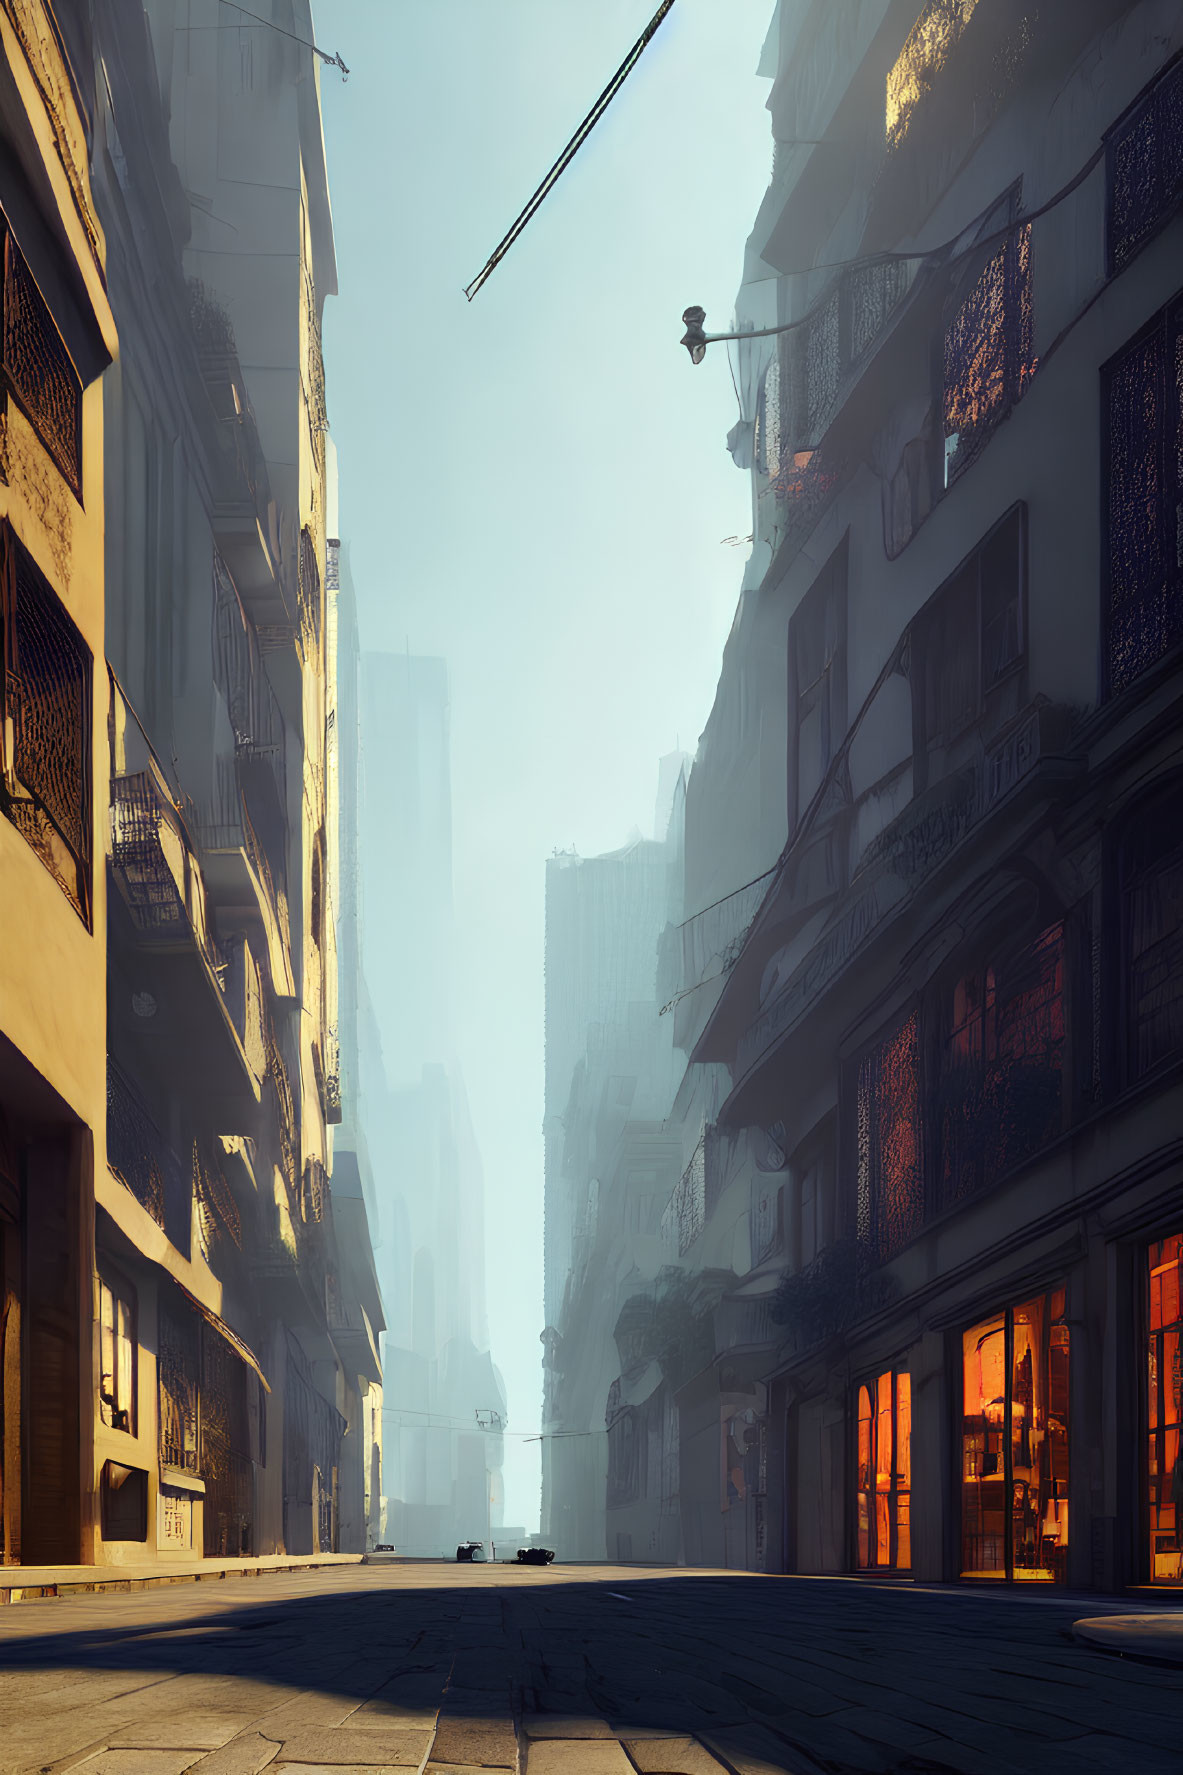 Deserted urban street at sunrise or sunset with warm light, tall buildings, and hazy atmosphere